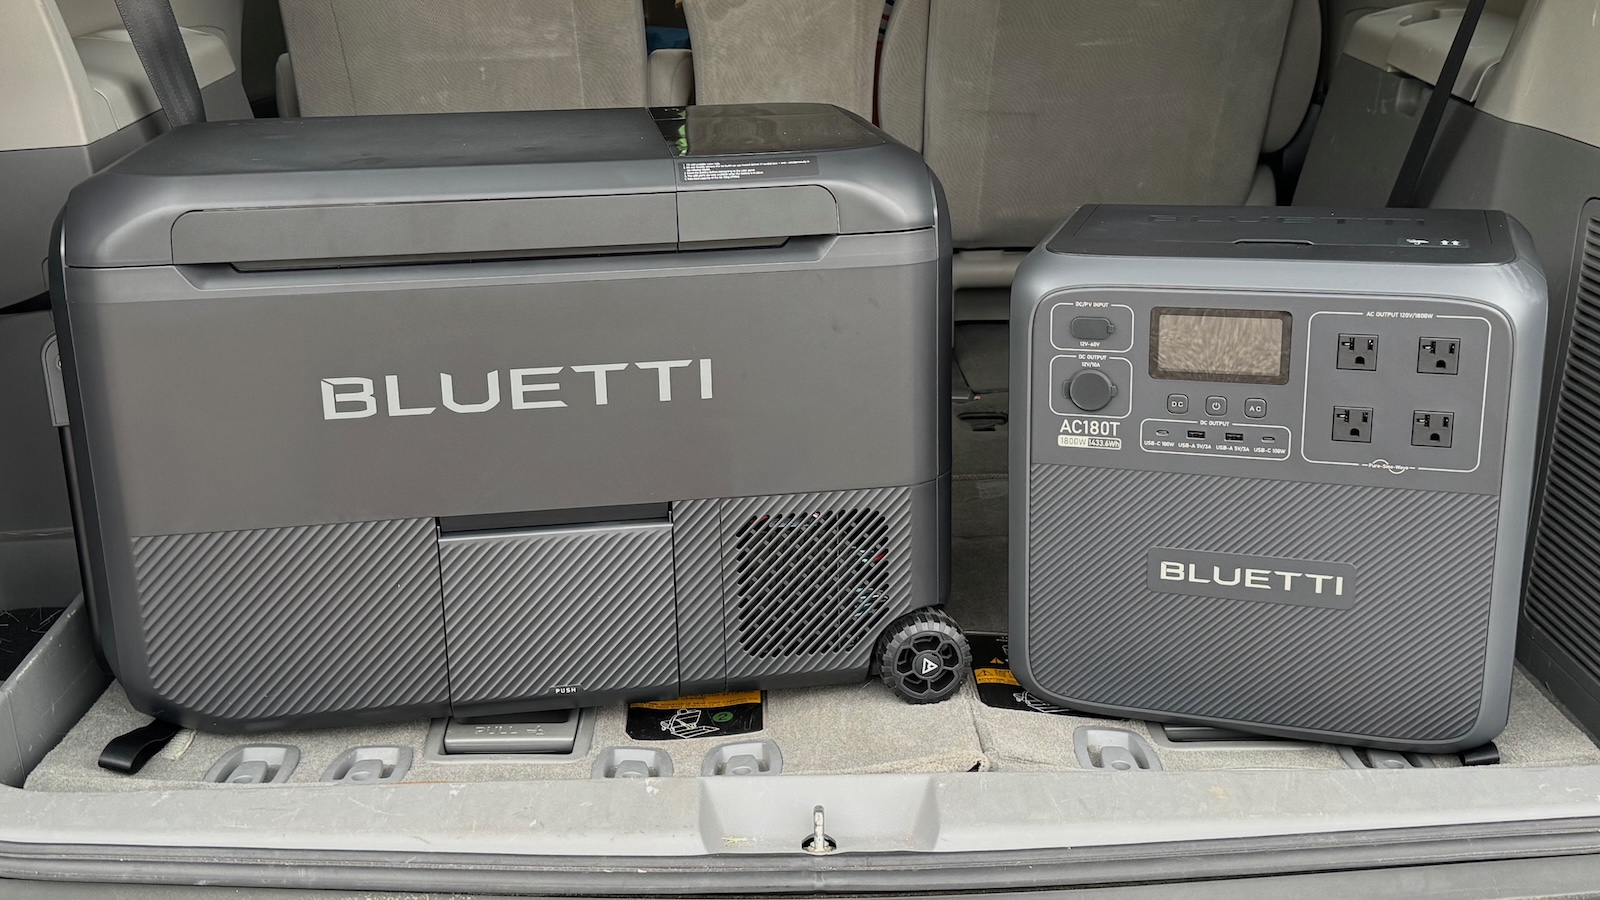 Review: BLUETTI's New SwapSolar Ecosystem Includes App-Enabled Portable Fridge and Power Station